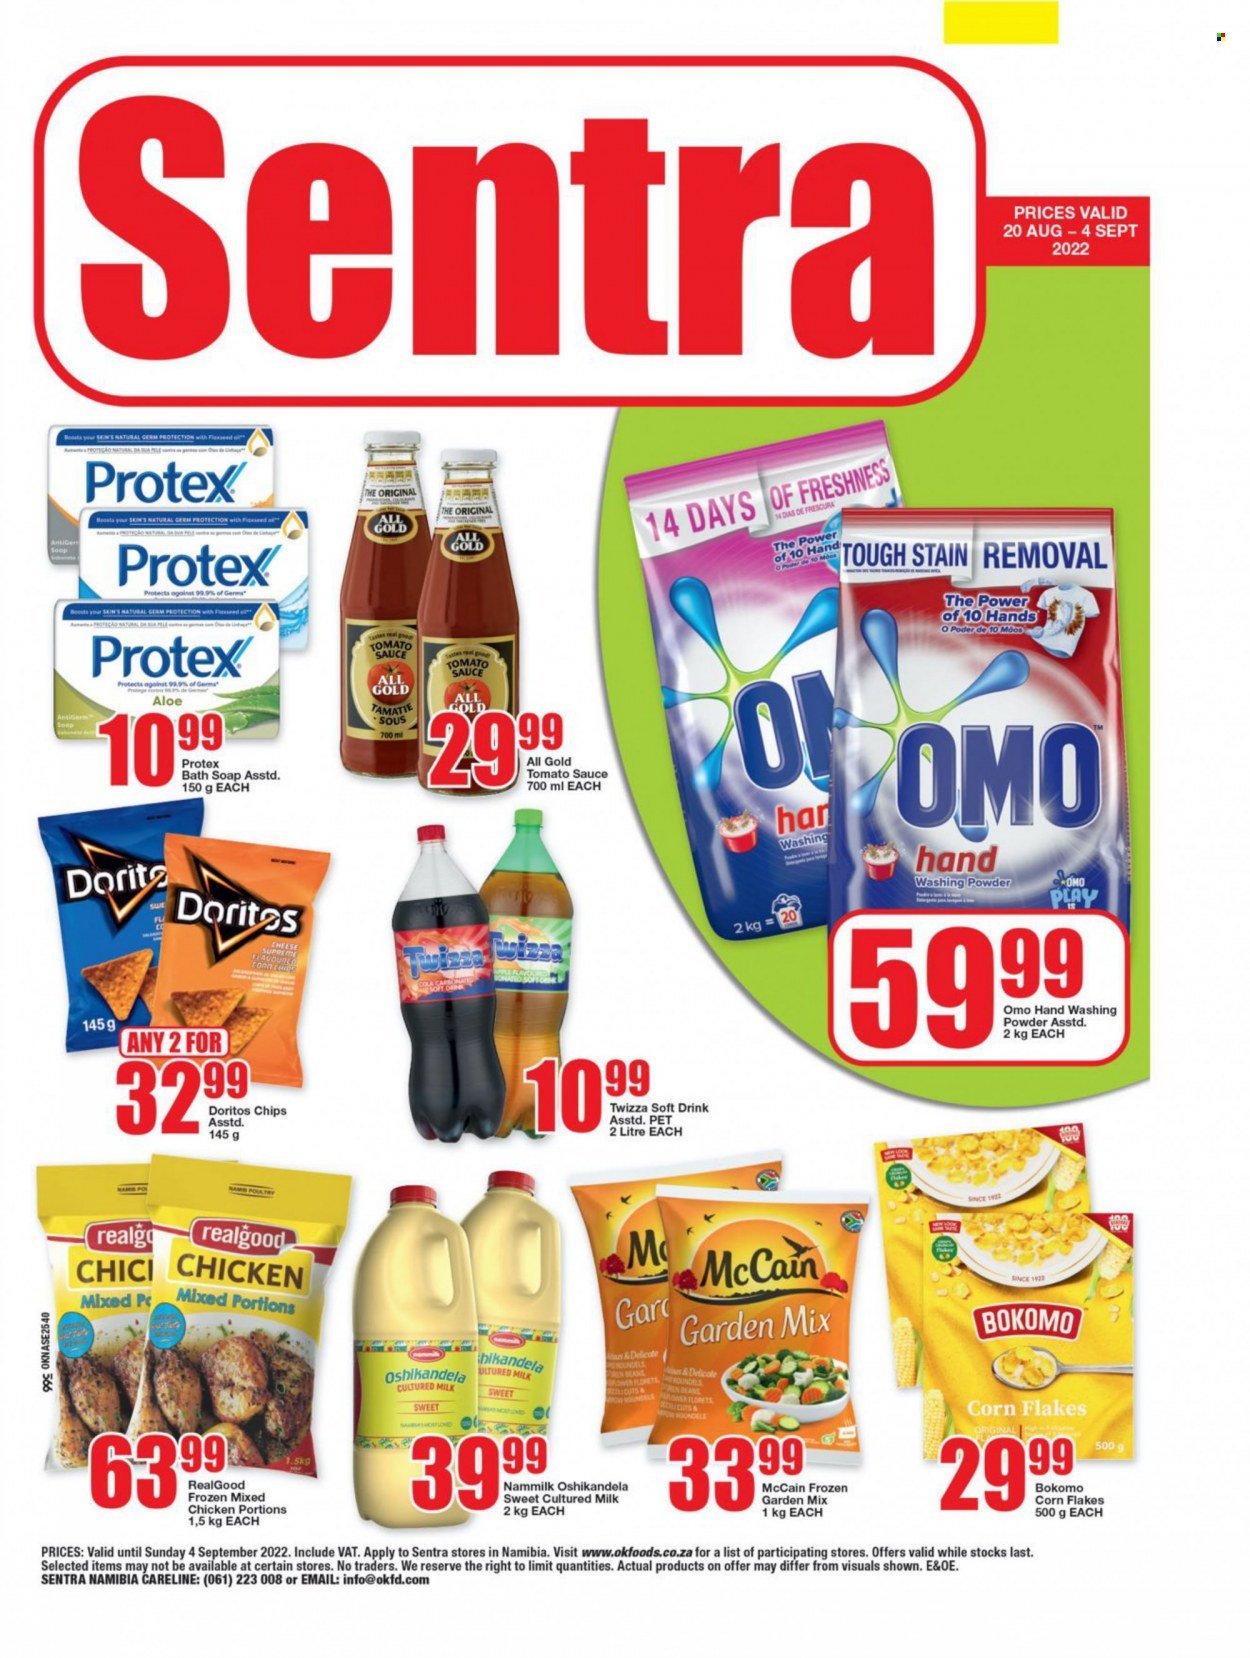 OK catalogue  - 20/08/2022 - 04/09/2022 - Sales products - beans, sauce, cheese, milk, McCain, Doritos, tomato sauce, corn flakes, oil, soft drink, Boost. Page 1.